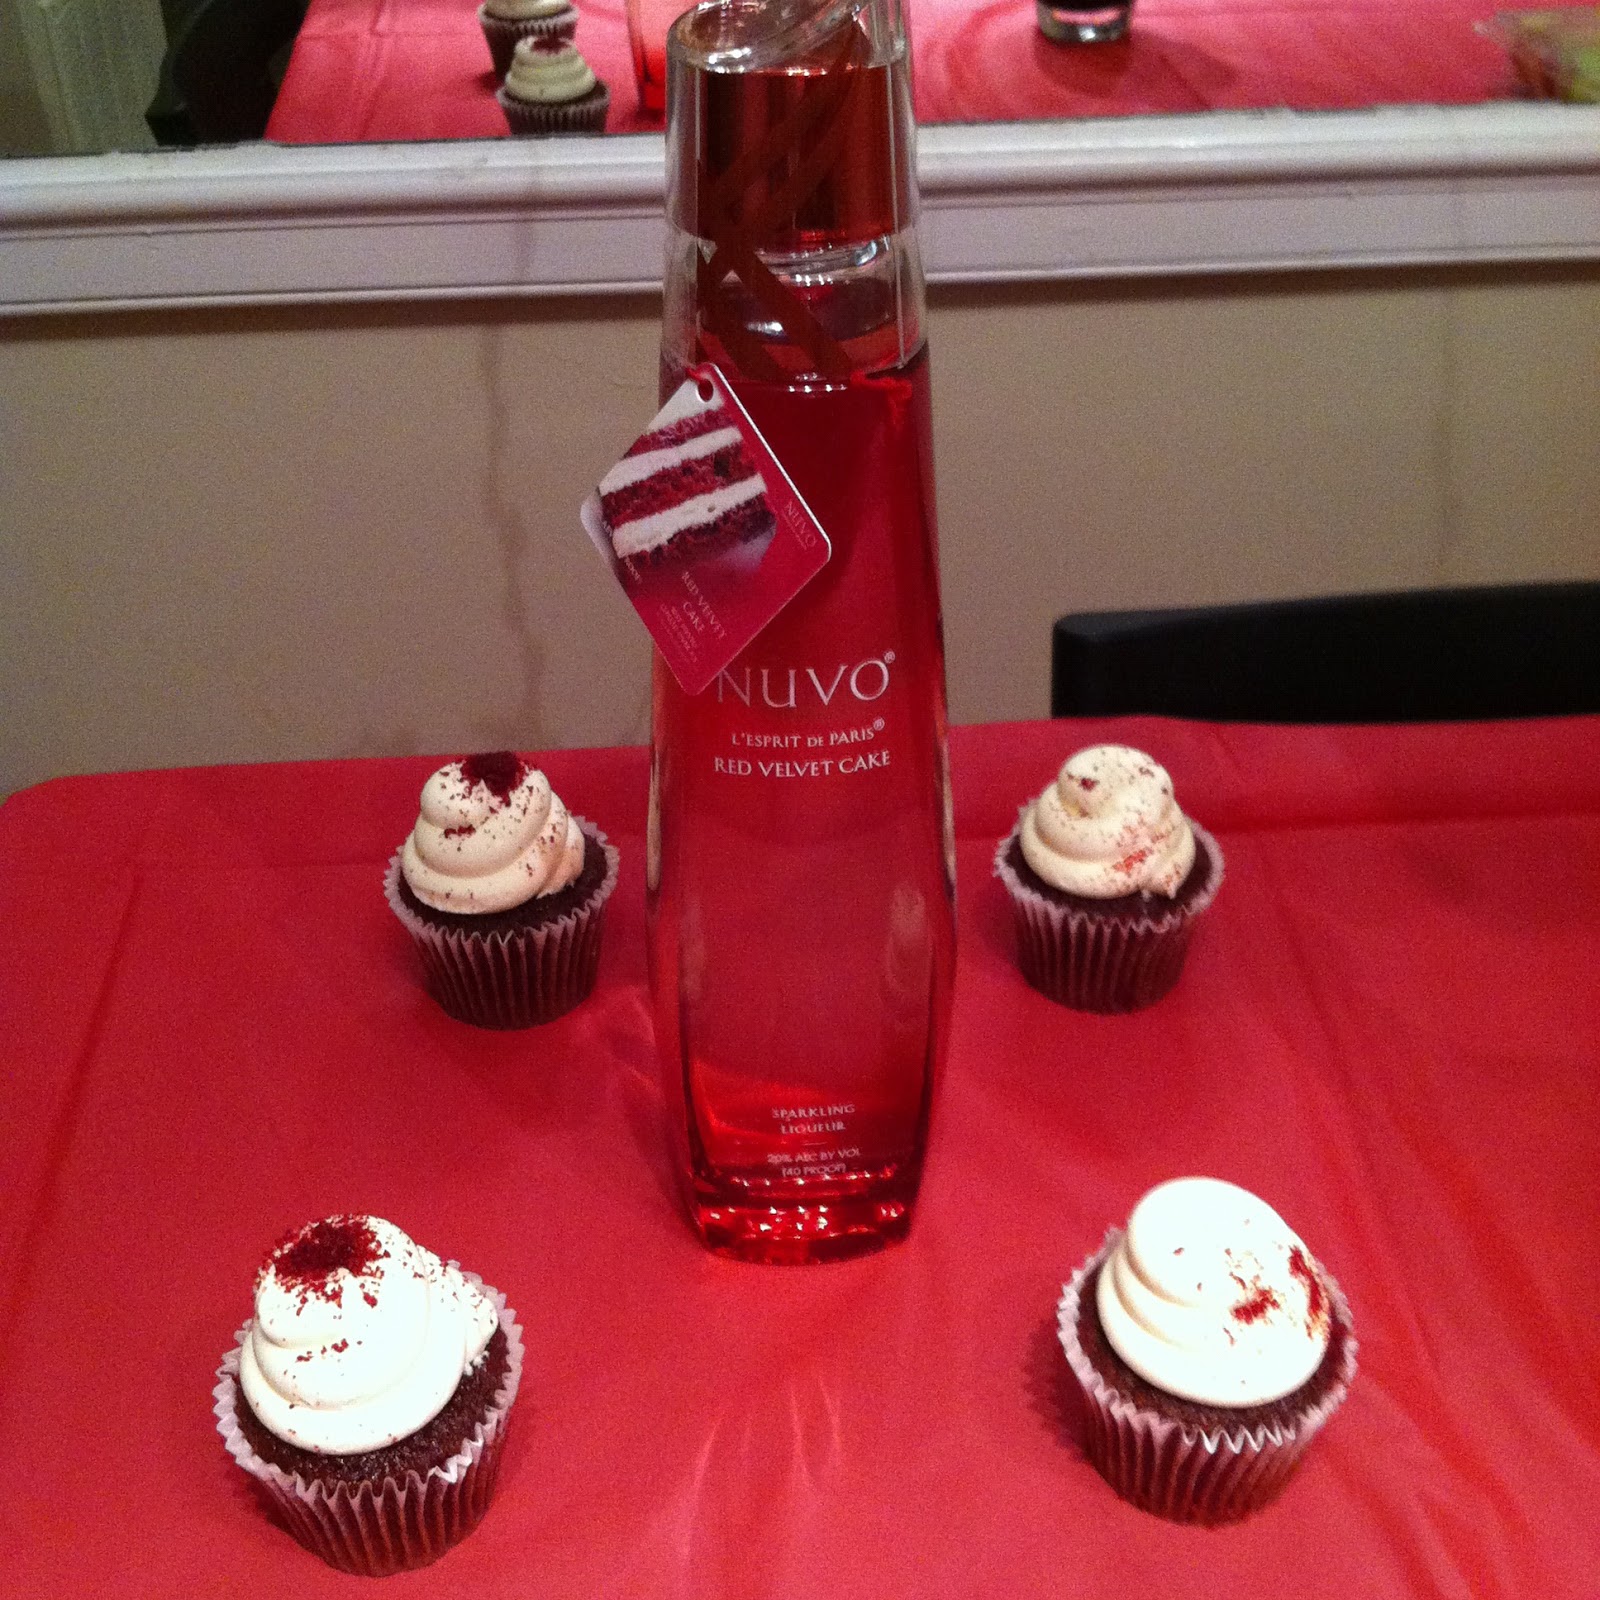 What Can I Mix With Nuvo Red Velvet